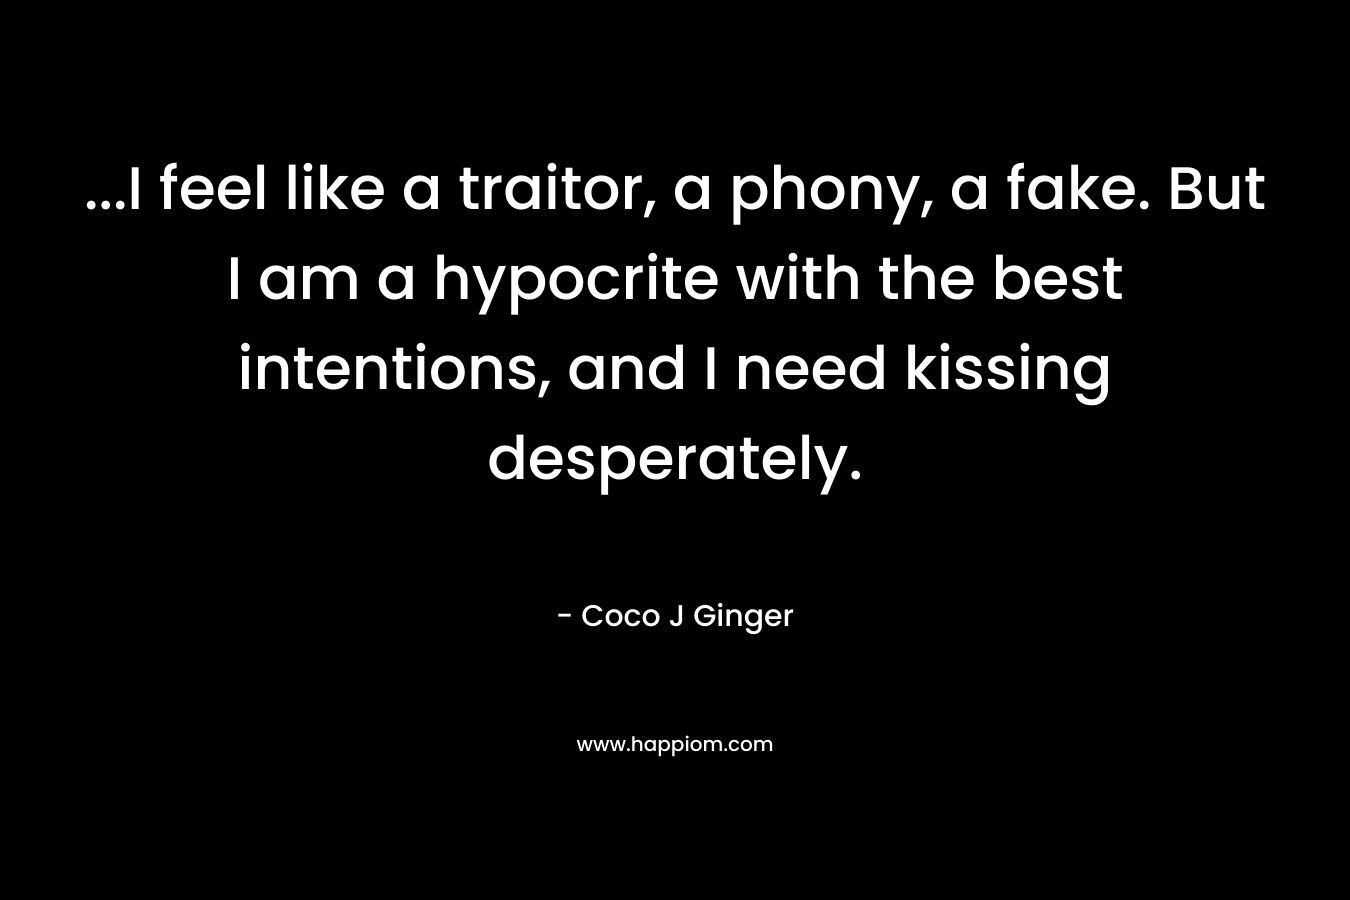 …I feel like a traitor, a phony, a fake. But I am a hypocrite with the best intentions, and I need kissing desperately. – Coco J Ginger